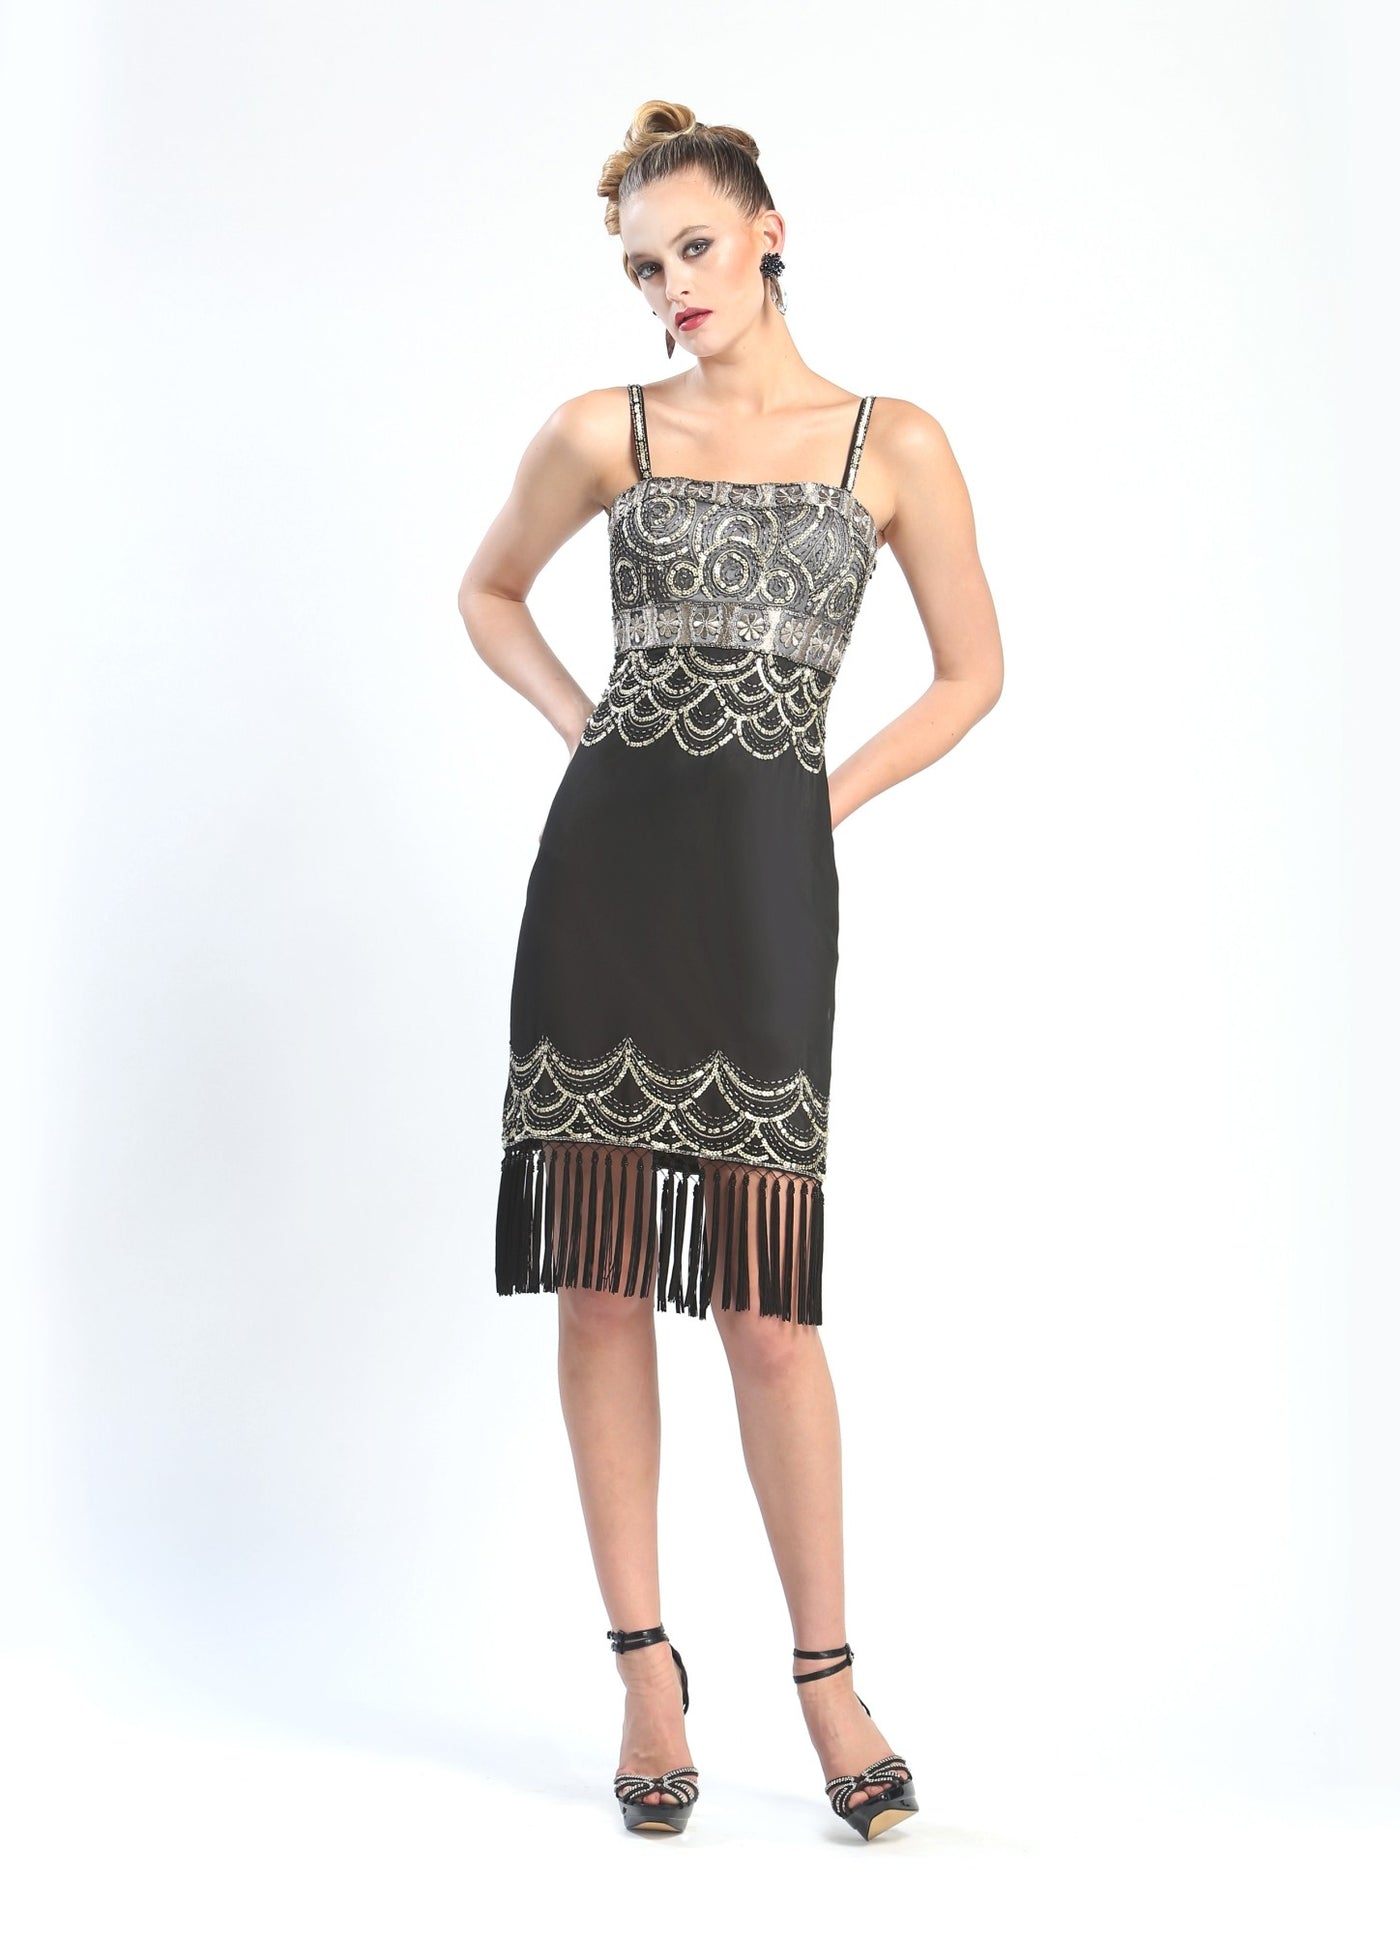 Beaded Fringe Hem Party Dress in Black Platinum by Sue Wong - SOLD OUT